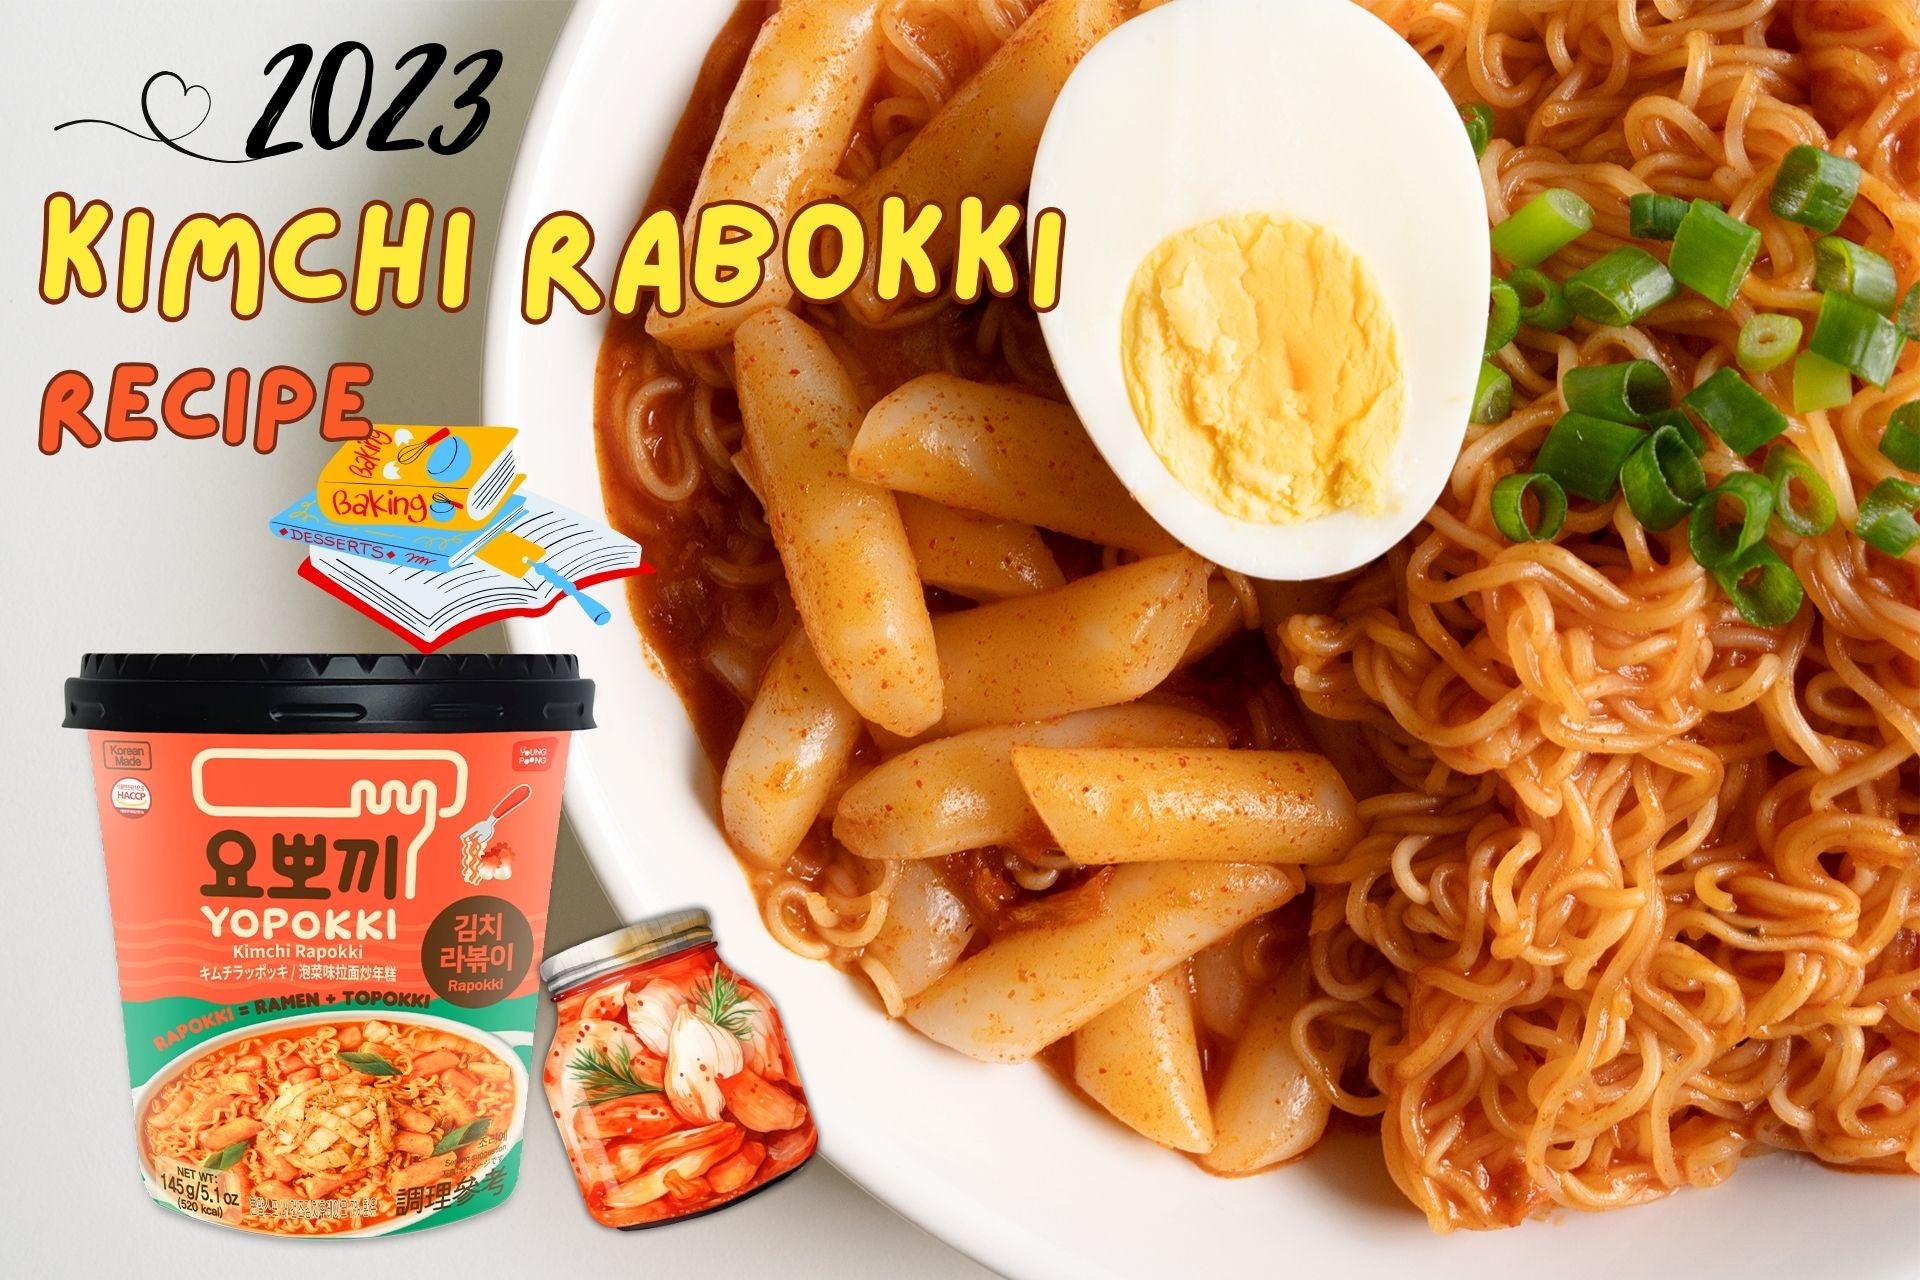 yopokki-cup-of-Kimchi-rabokki-containing-traditional-Korean-fermented-kimchi-and-sweet-and-spicy-rabokki